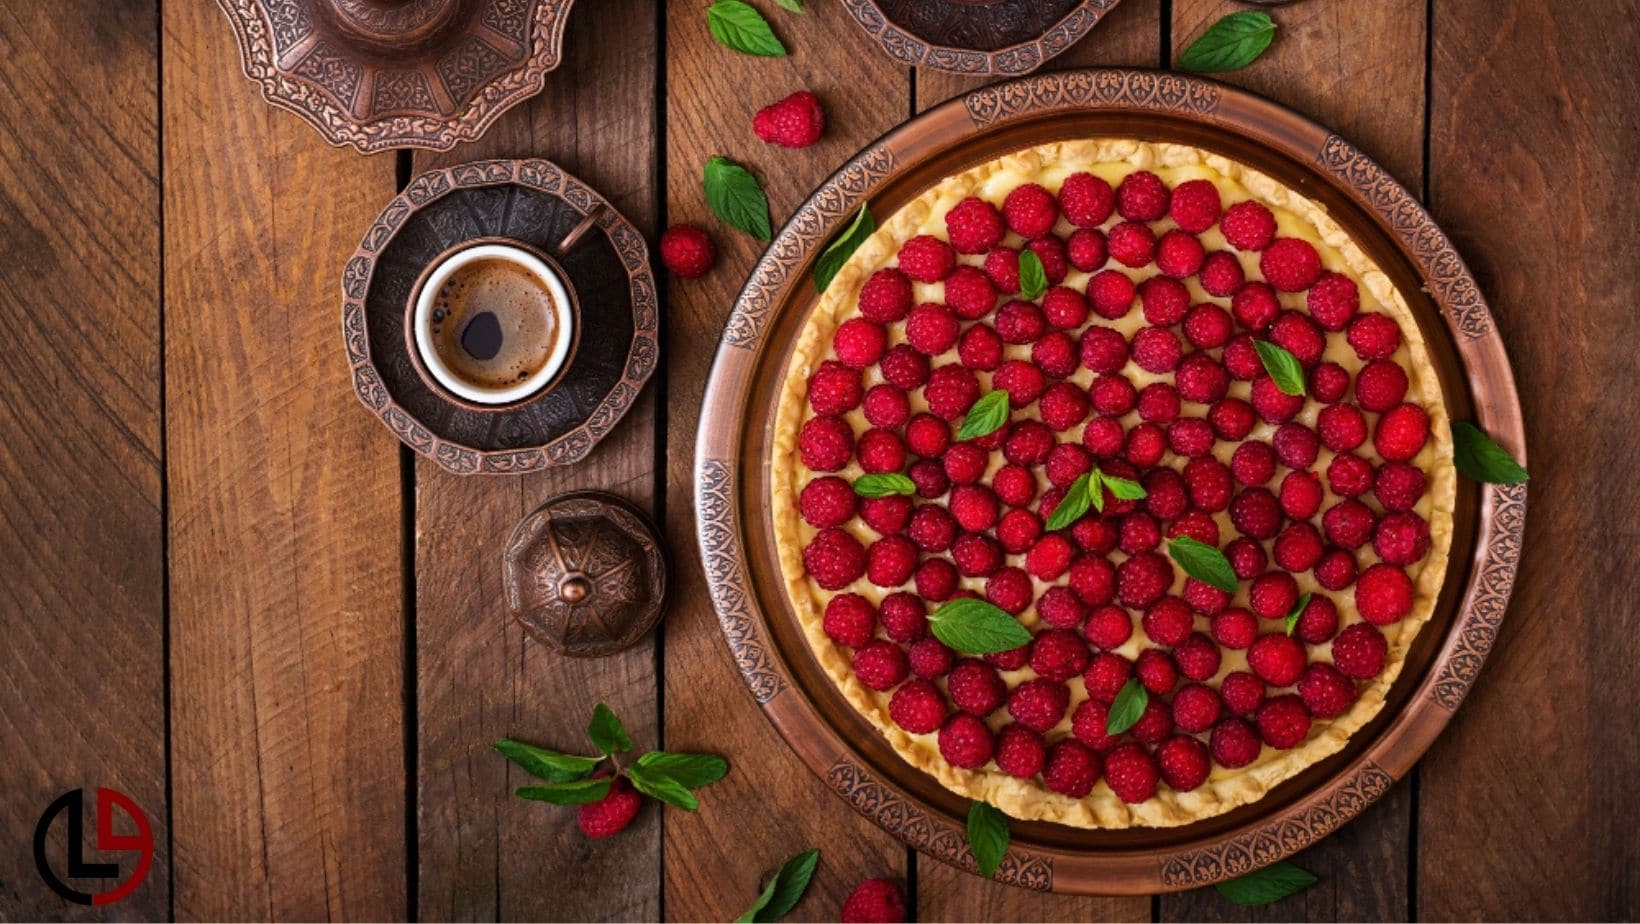 ricotta tart is a traditional Italian dessert made from a filling of ricotta cheese